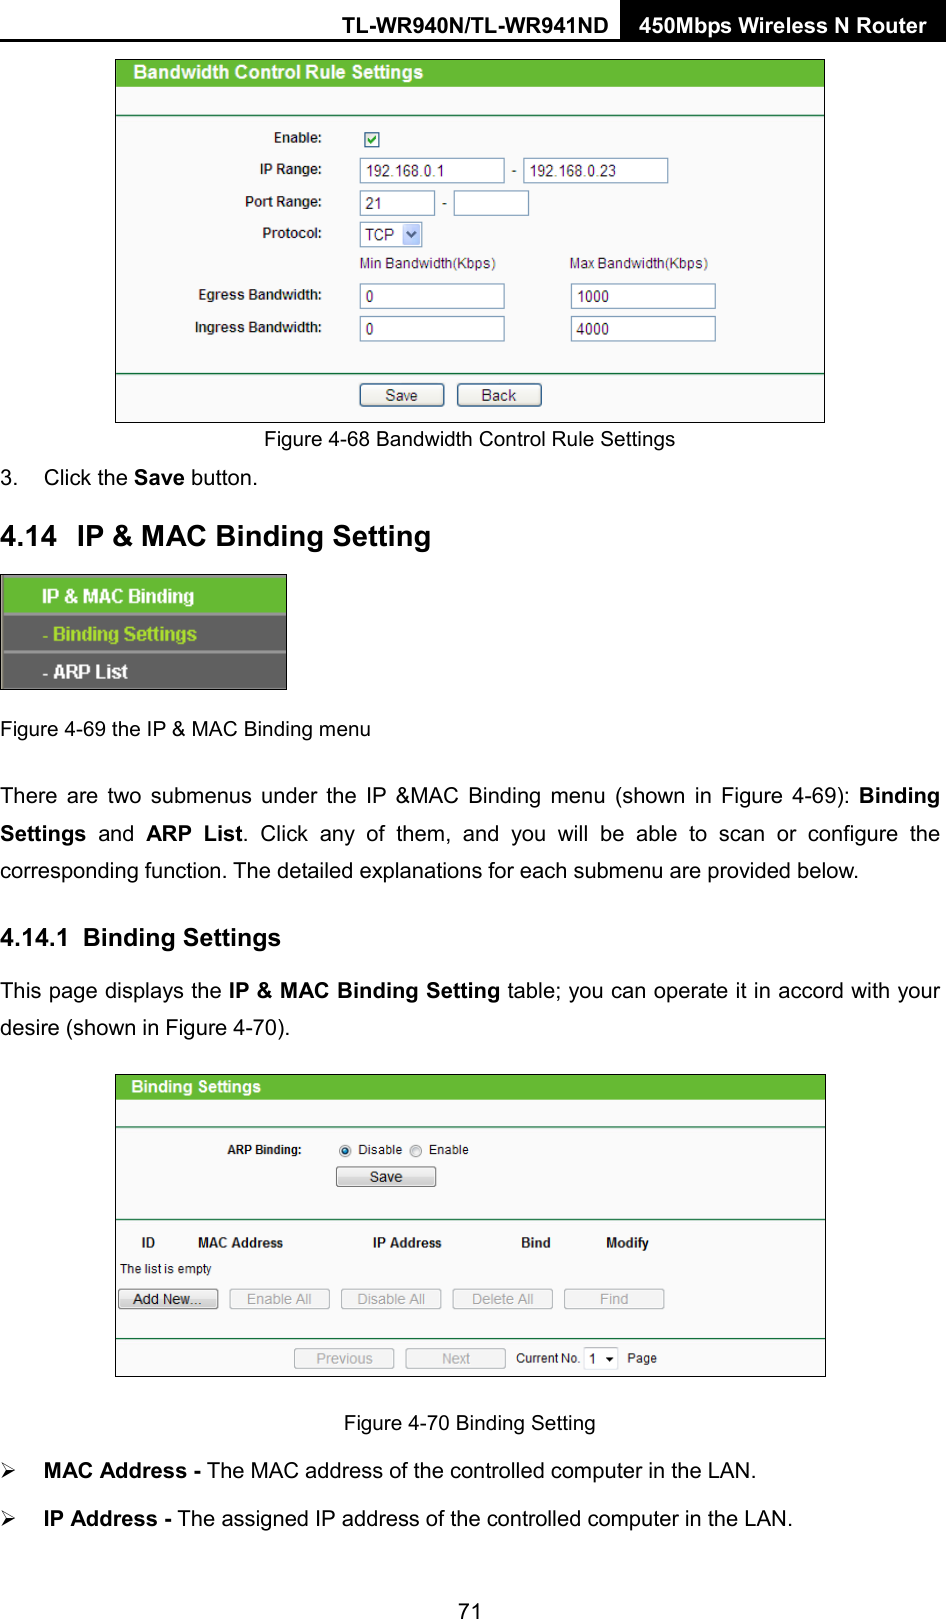 TL-WR940N/TL-WR941ND 450Mbps Wireless N Router   Figure 4-68 Bandwidth Control Rule Settings 3. Click the Save button. 4.14 IP &amp; MAC Binding Setting  Figure 4-69 the IP &amp; MAC Binding menu There are two submenus under the IP &amp;MAC Binding menu (shown in Figure  4-69):  Binding Settings  and ARP List. Click any of them, and you will be able to scan or configure the corresponding function. The detailed explanations for each submenu are provided below. 4.14.1 Binding Settings This page displays the IP &amp; MAC Binding Setting table; you can operate it in accord with your desire (shown in Figure 4-70).    Figure 4-70 Binding Setting  MAC Address - The MAC address of the controlled computer in the LAN.    IP Address - The assigned IP address of the controlled computer in the LAN.   71 